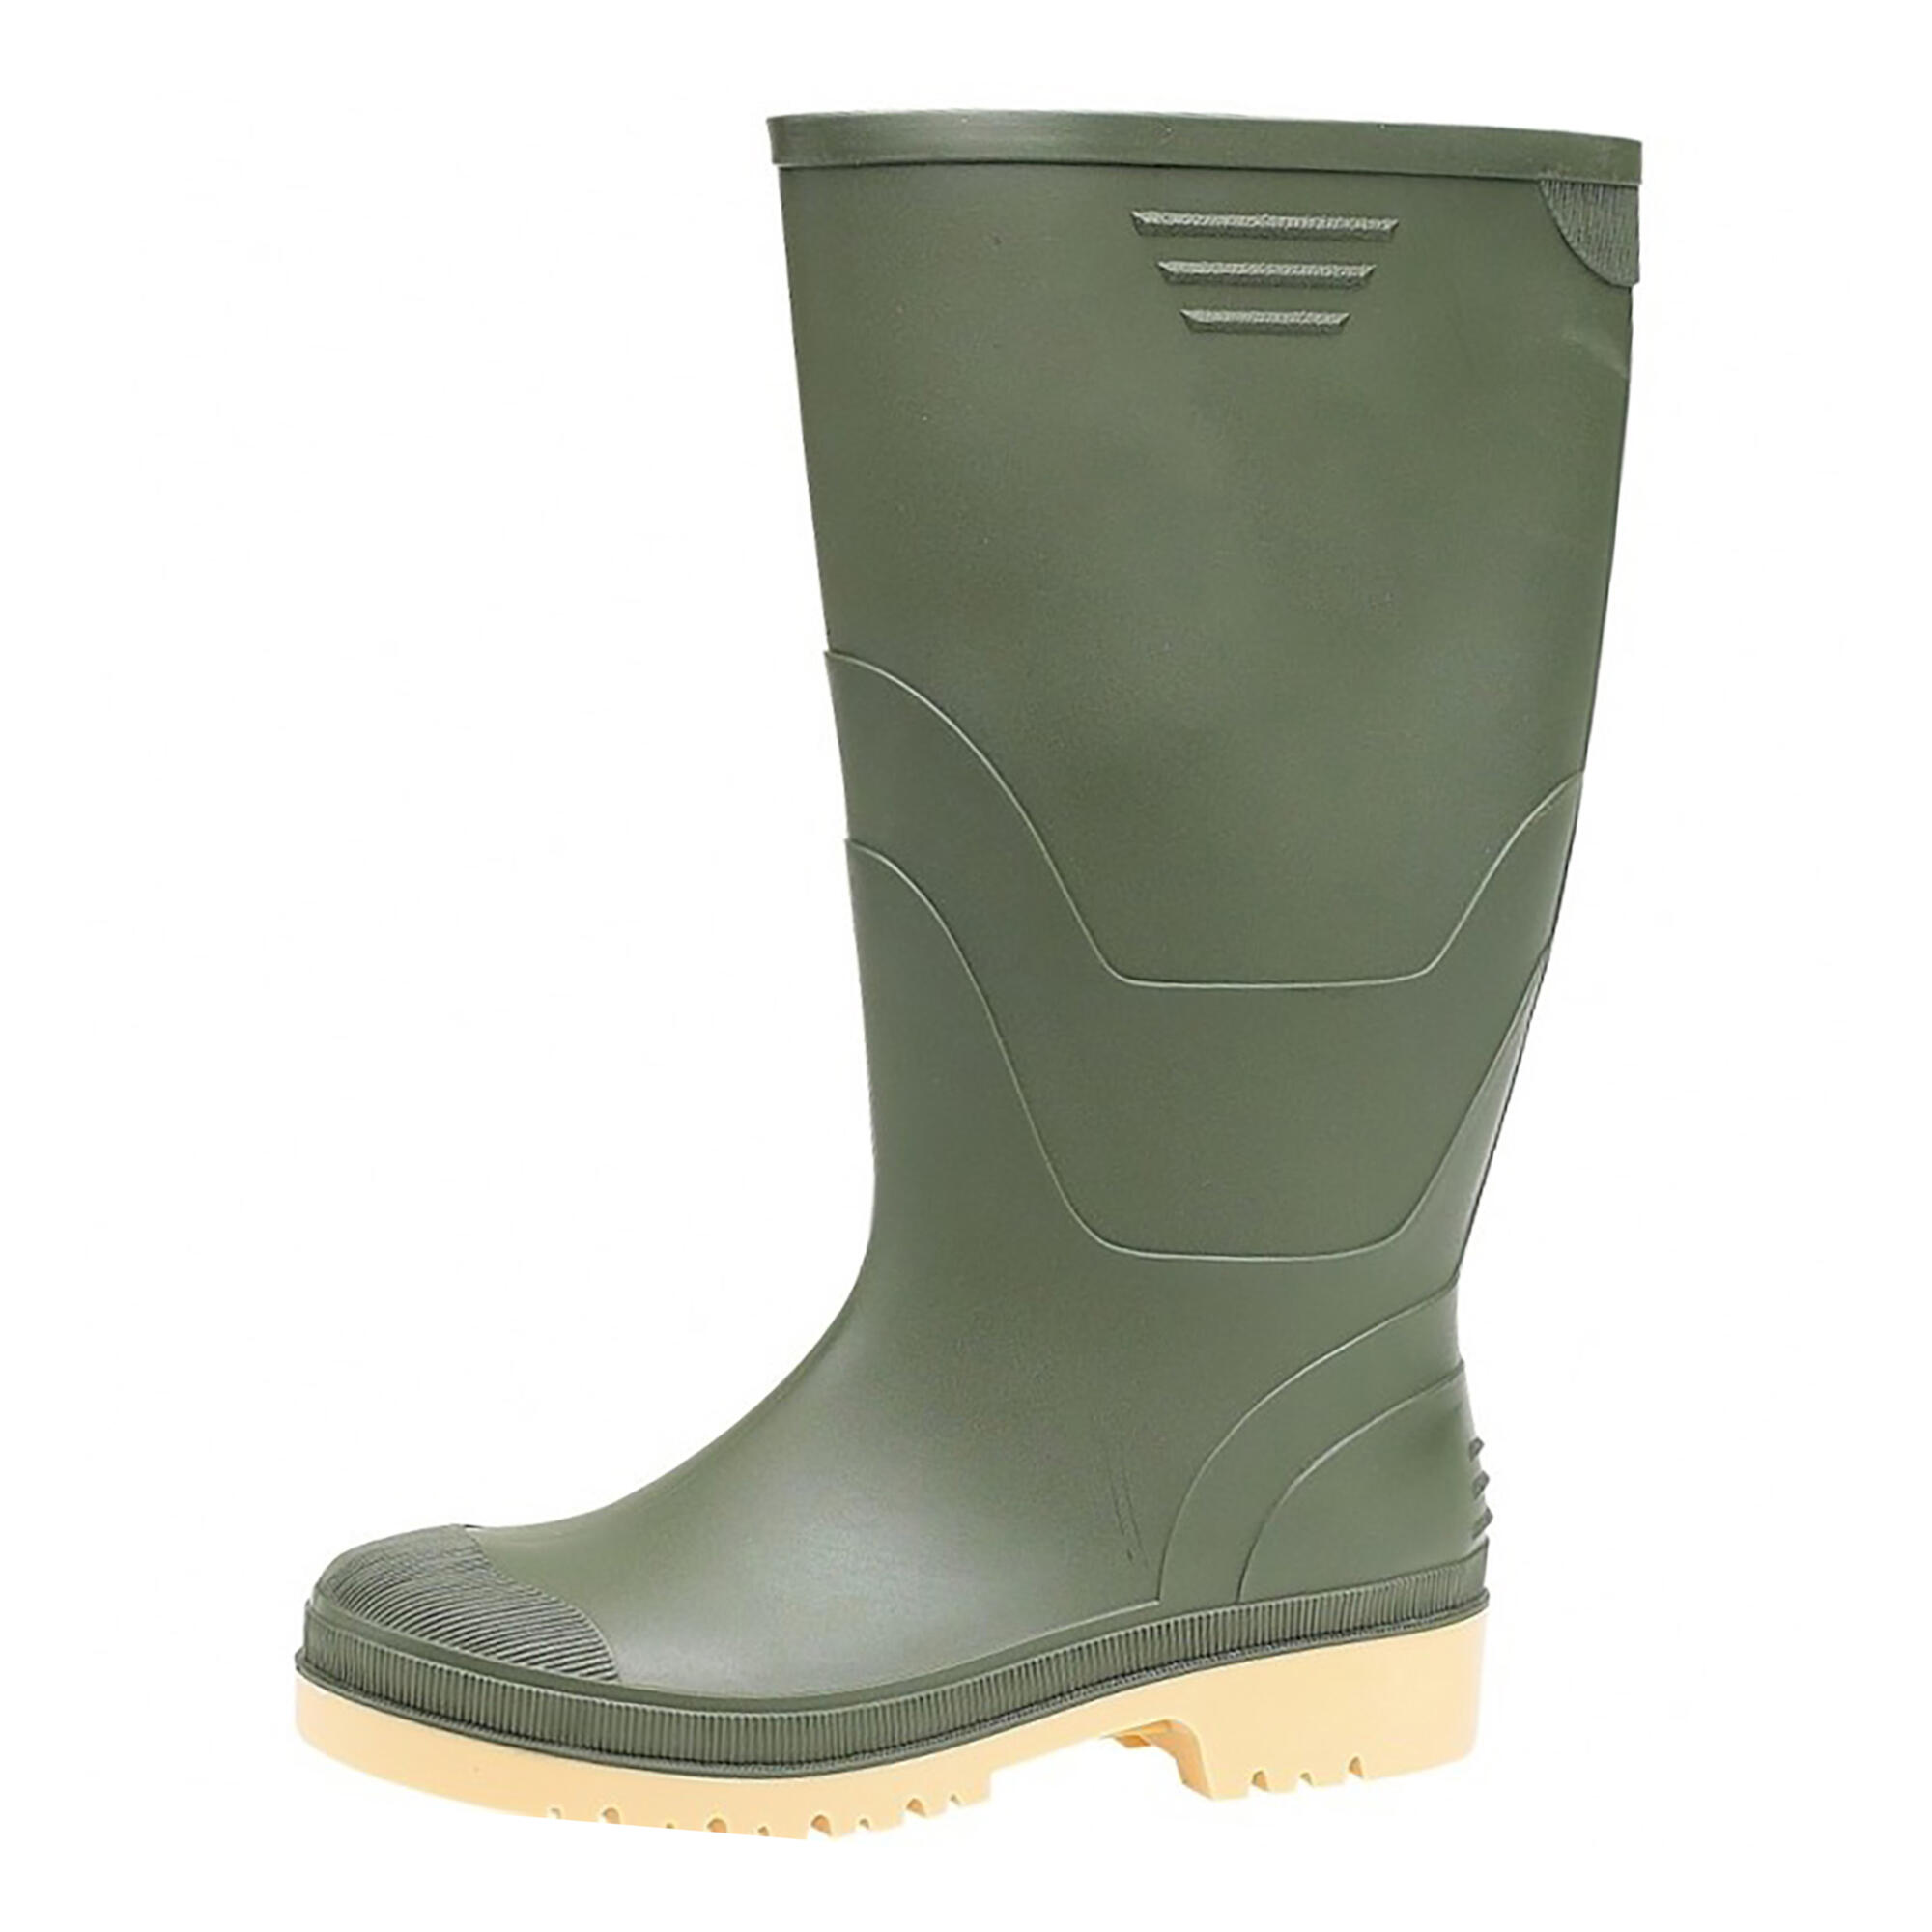 JNR Administrator Wellingtons / Ladies Womens Boots (Green) 3/3